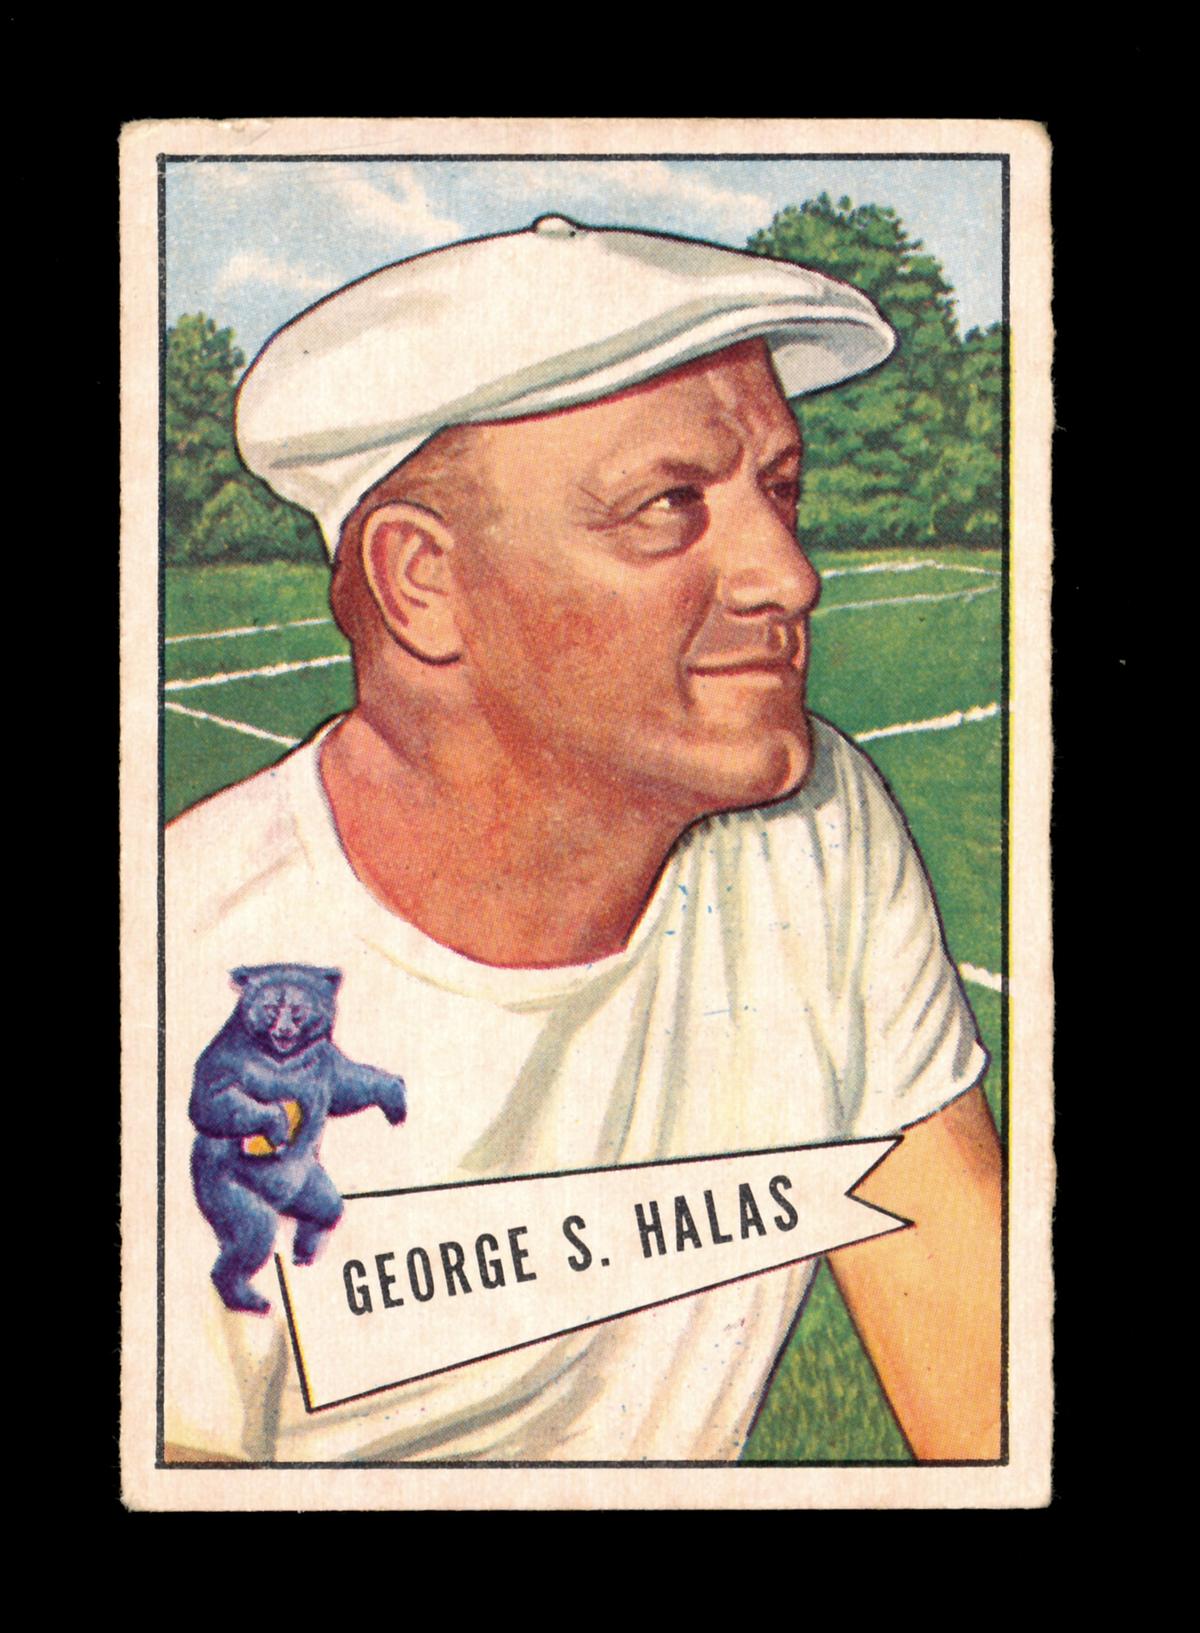 1952 Bowman Large Football Card  #48 Rookie Hall of Famer George Halas Chic